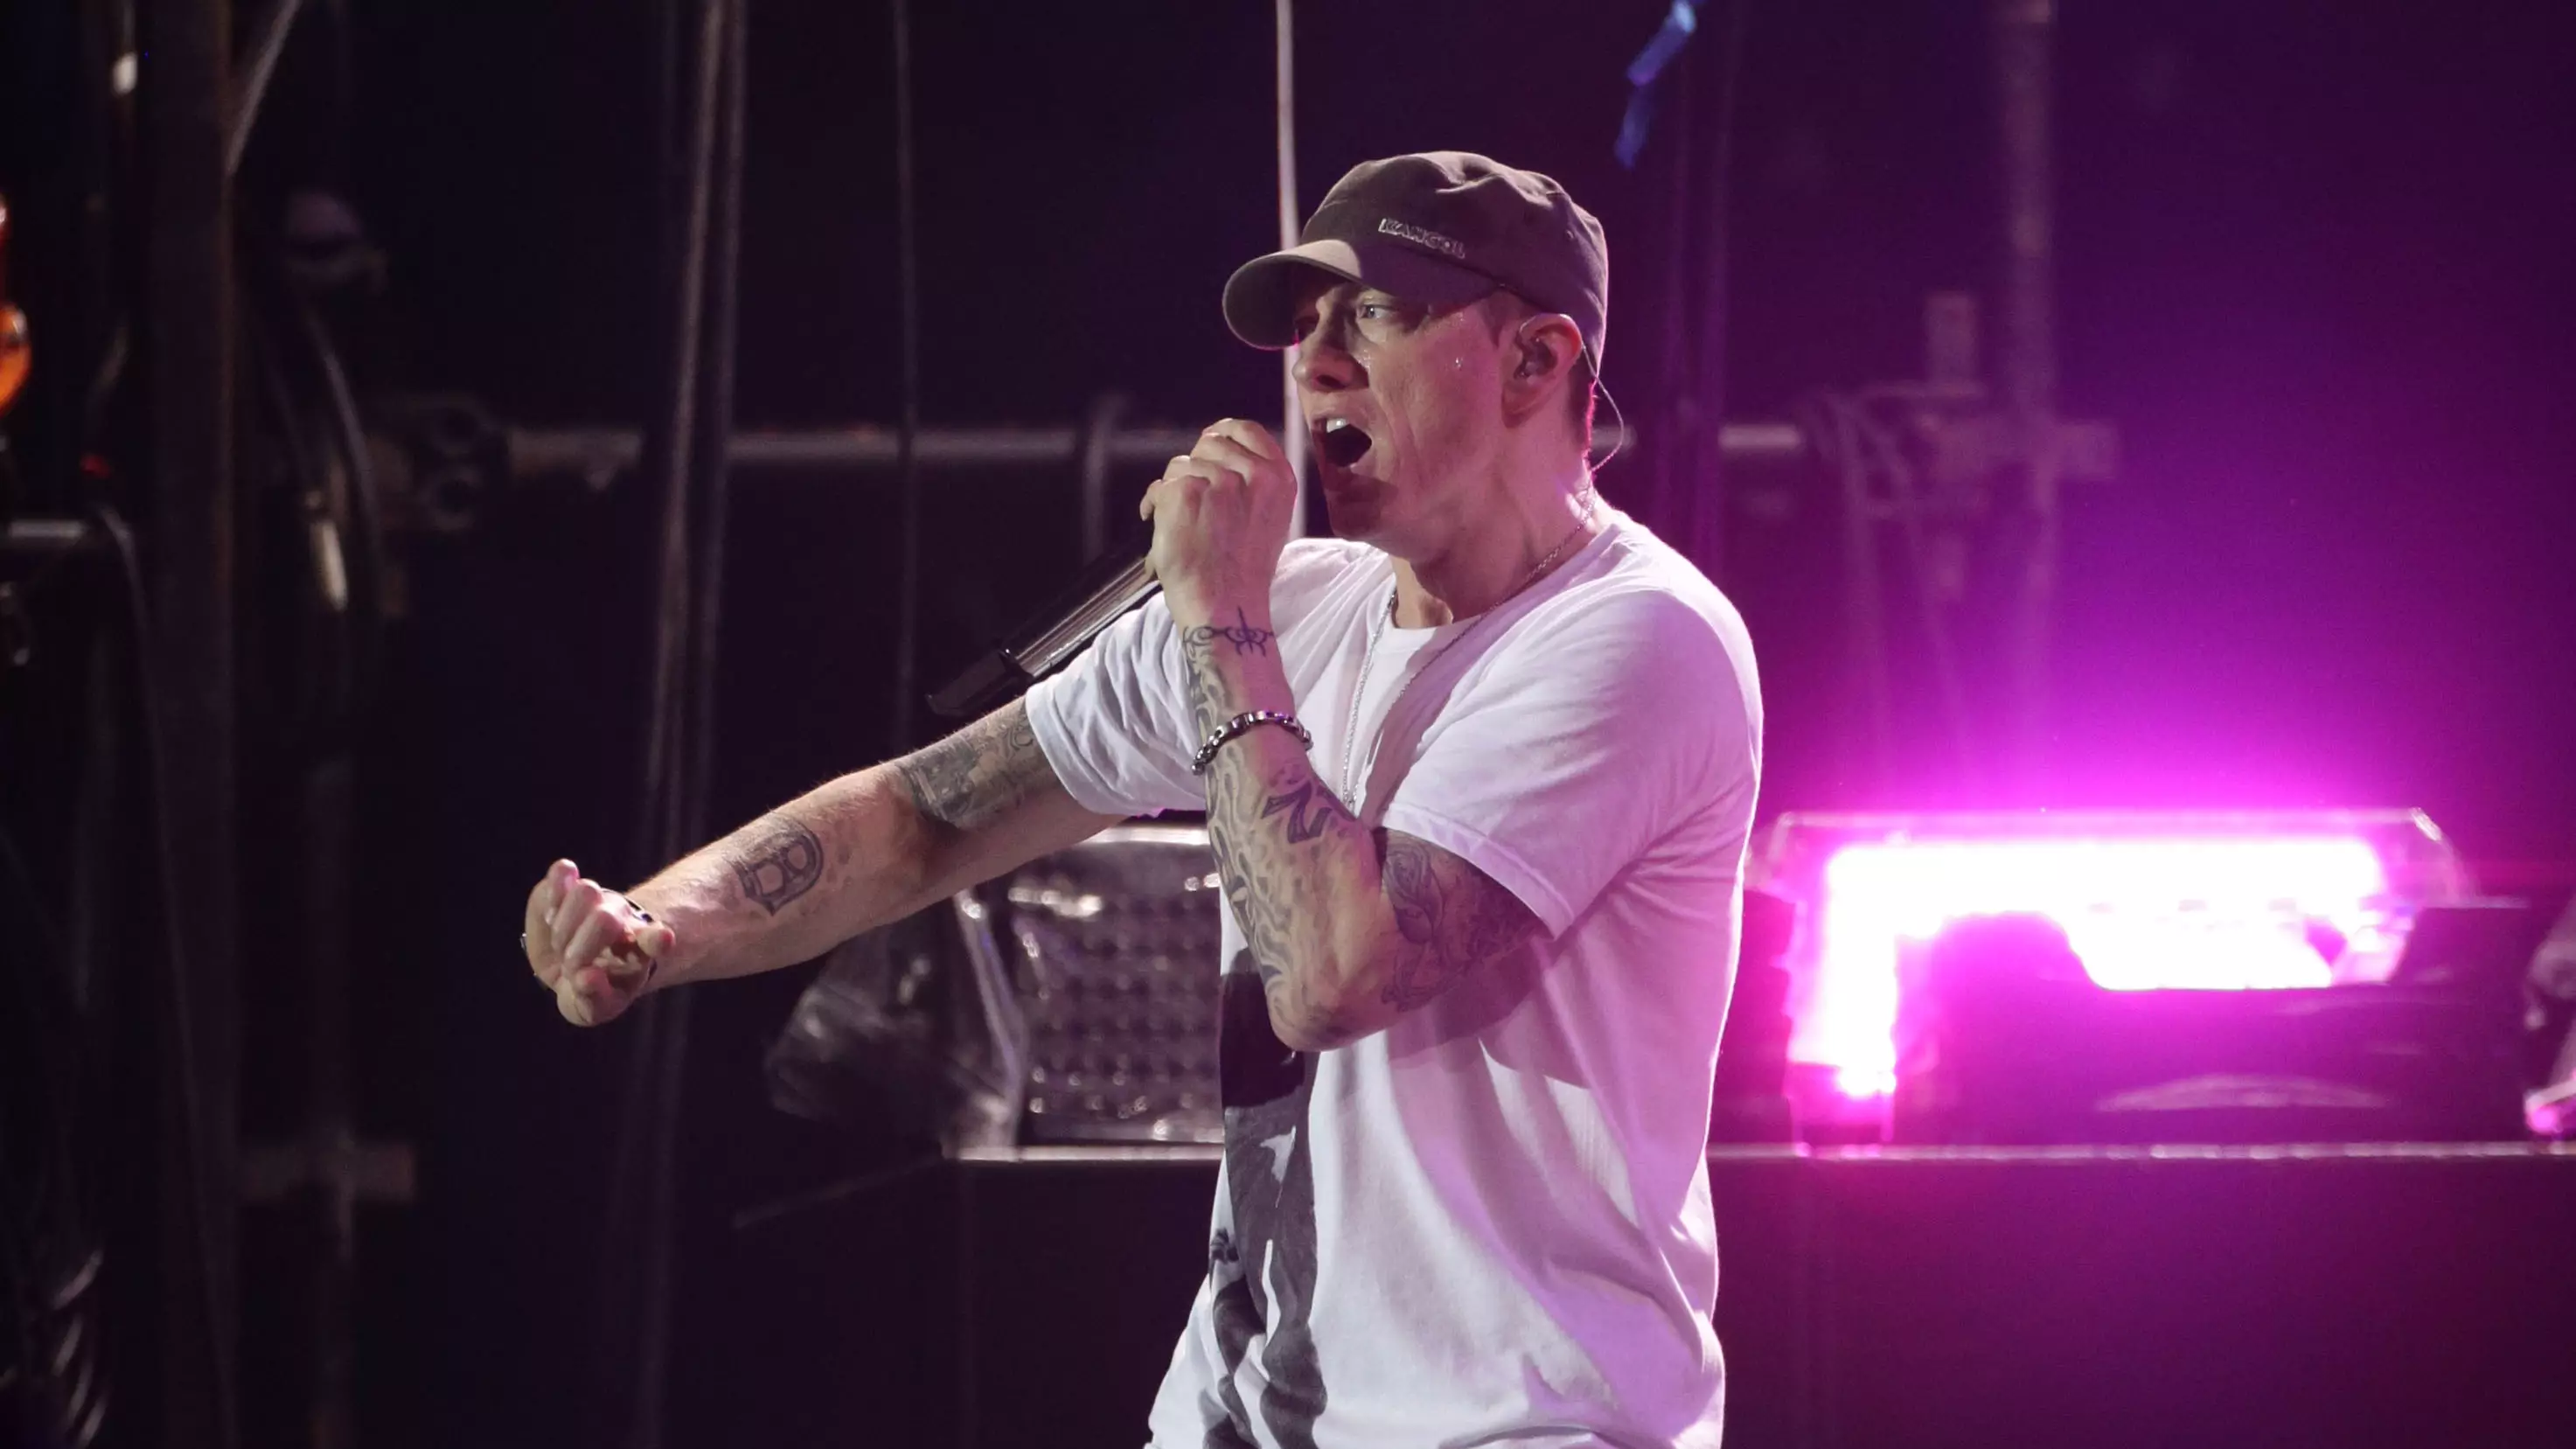 Eminem Pledges Support In Wake Of Manchester Attack